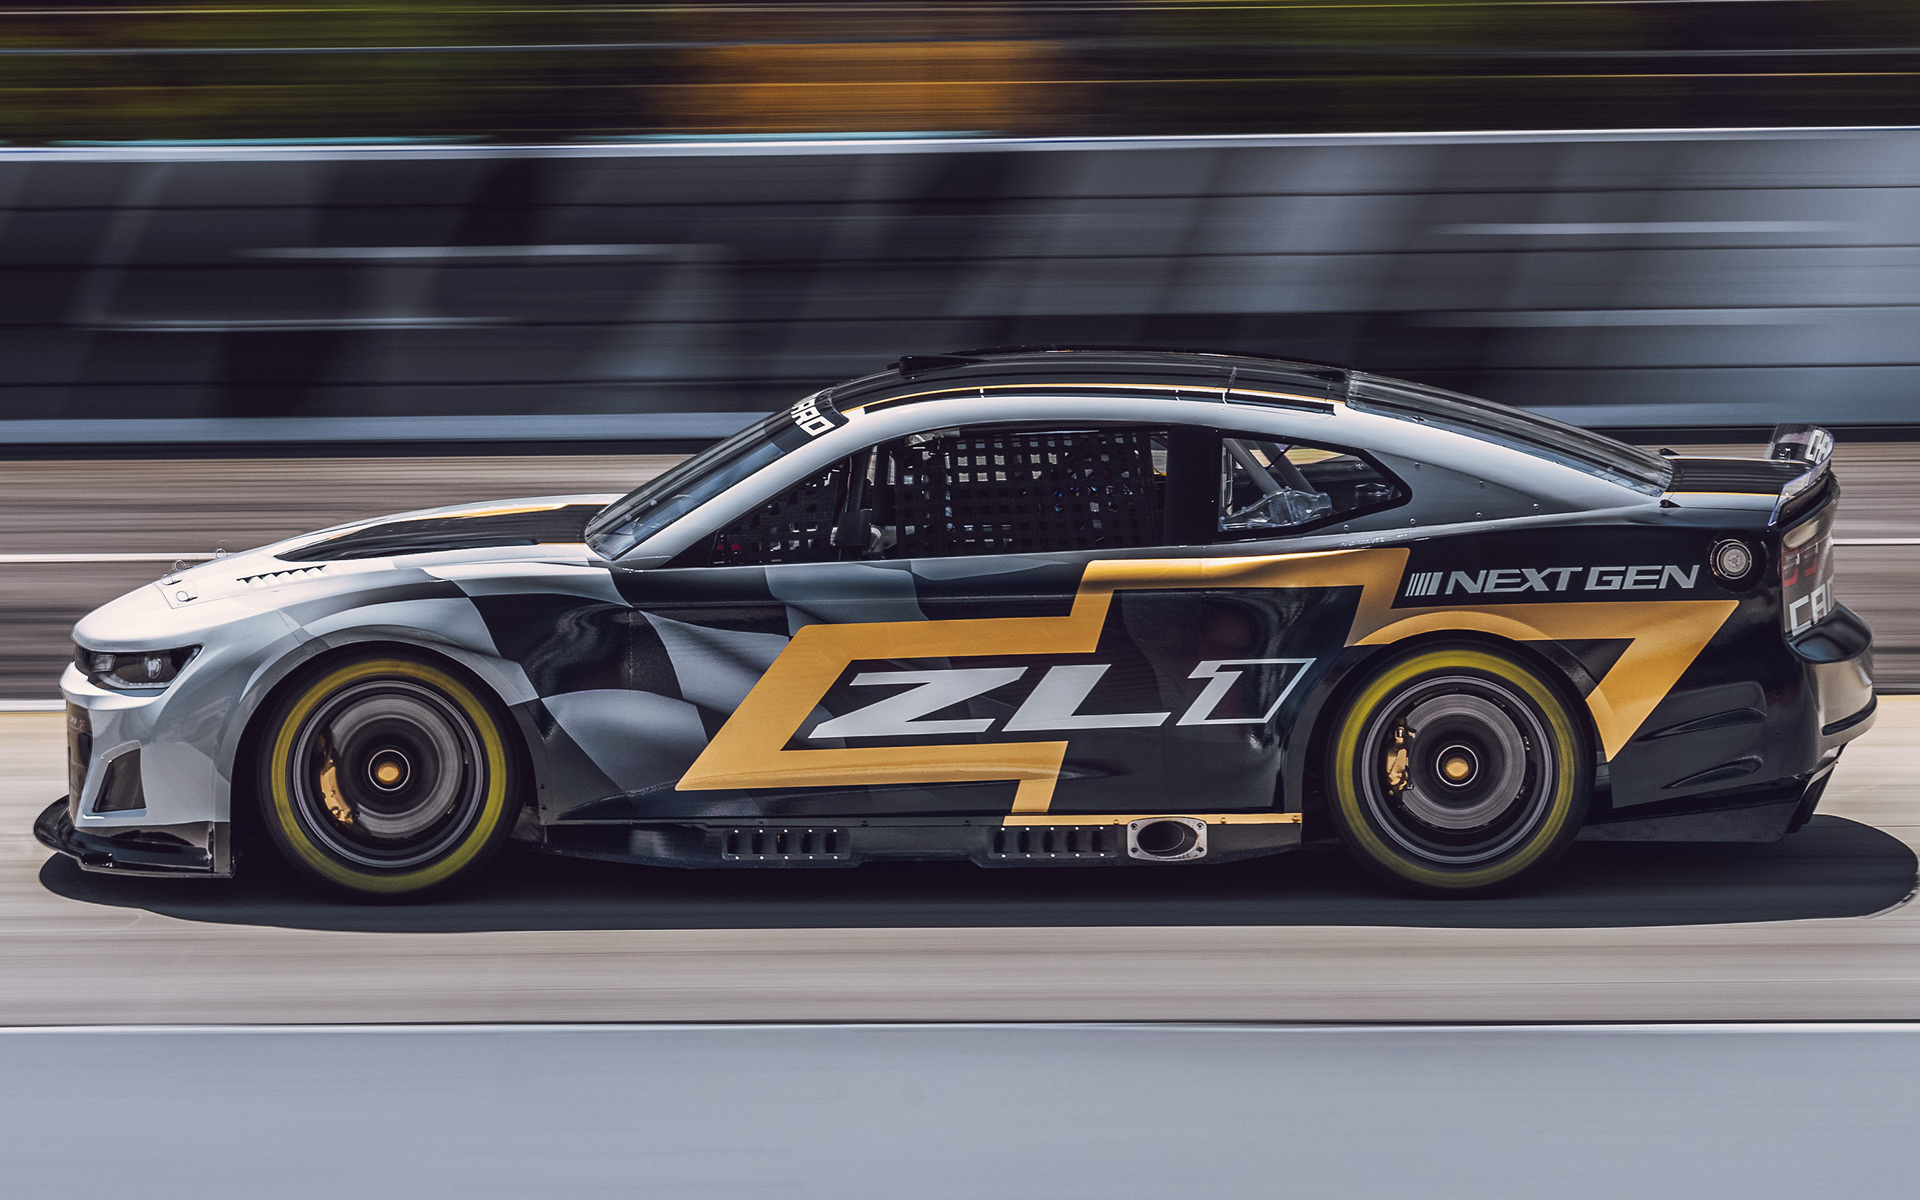 1920x1200 2022 Chevrolet Camaro ZL1 NASCAR Race Car Wallpapers and HD Images | Car Pixel